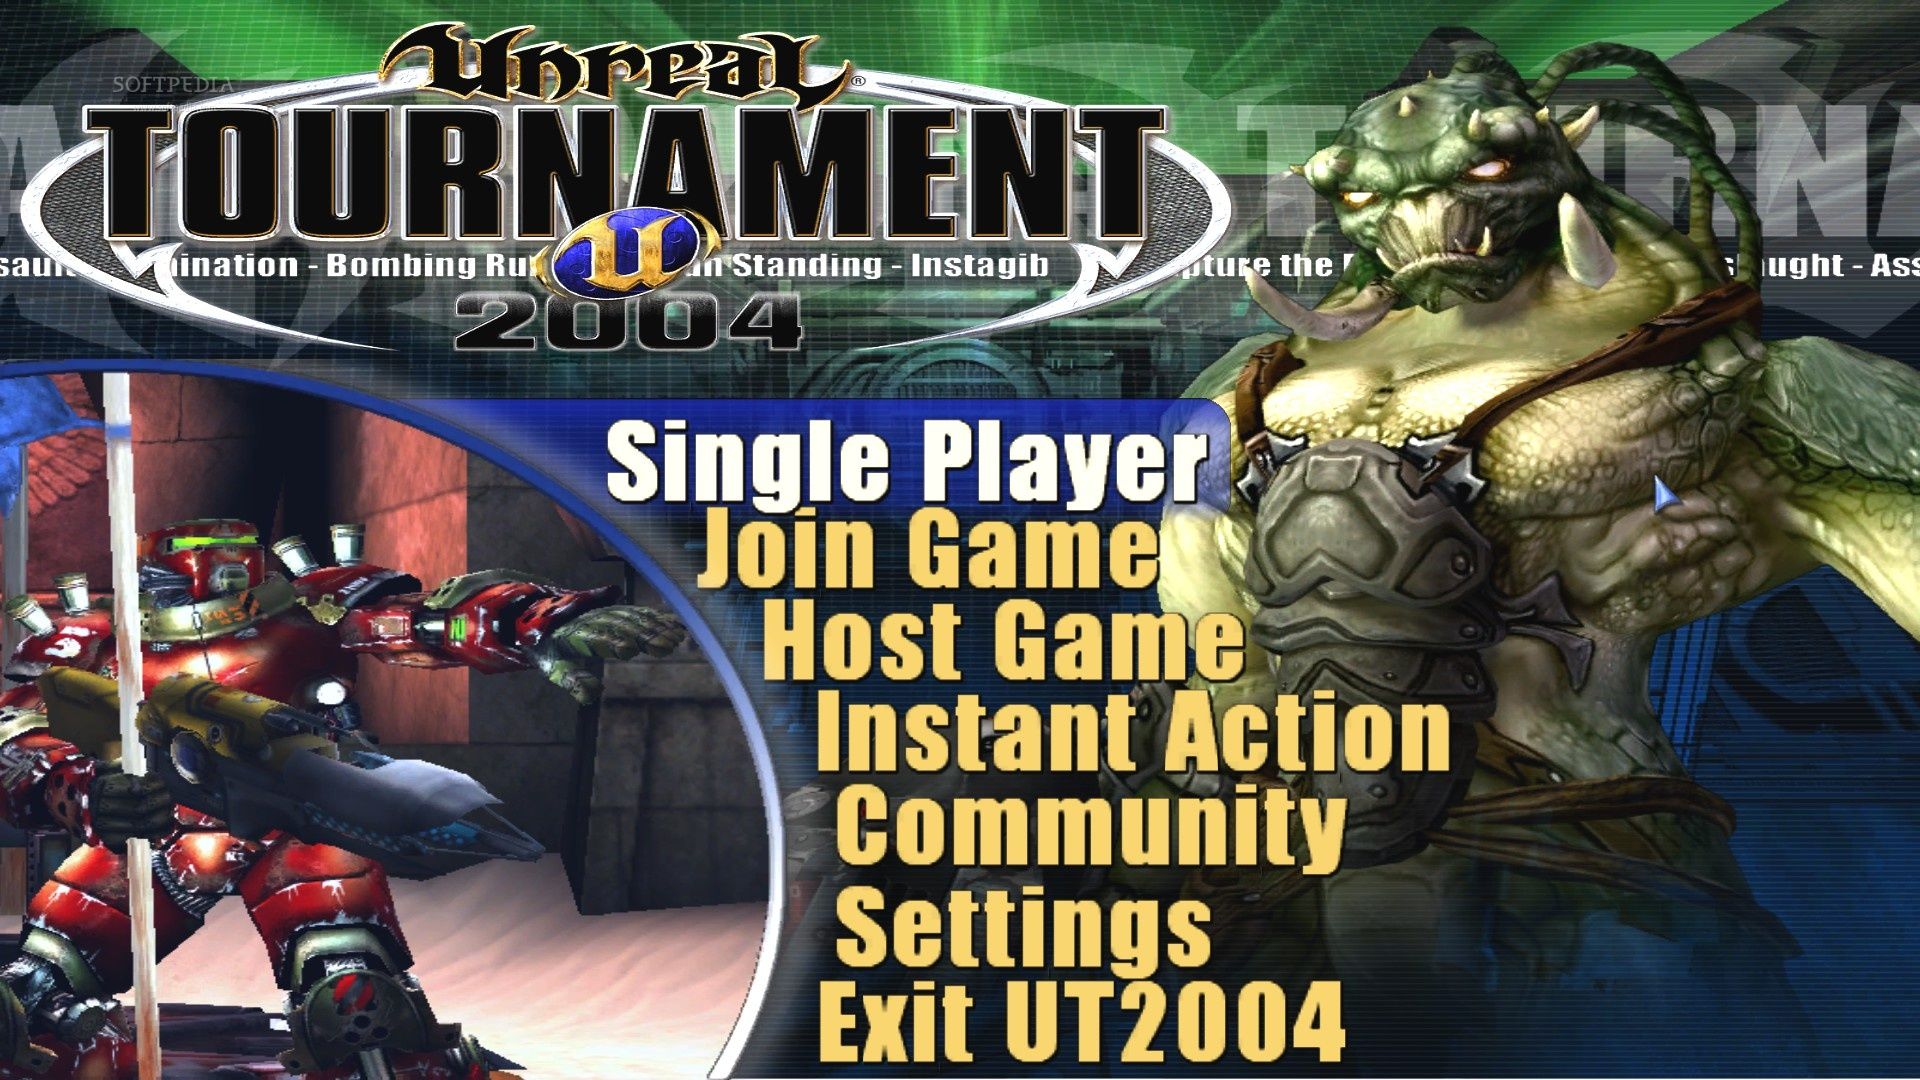 Unreal tournament 2004 on steam фото 49